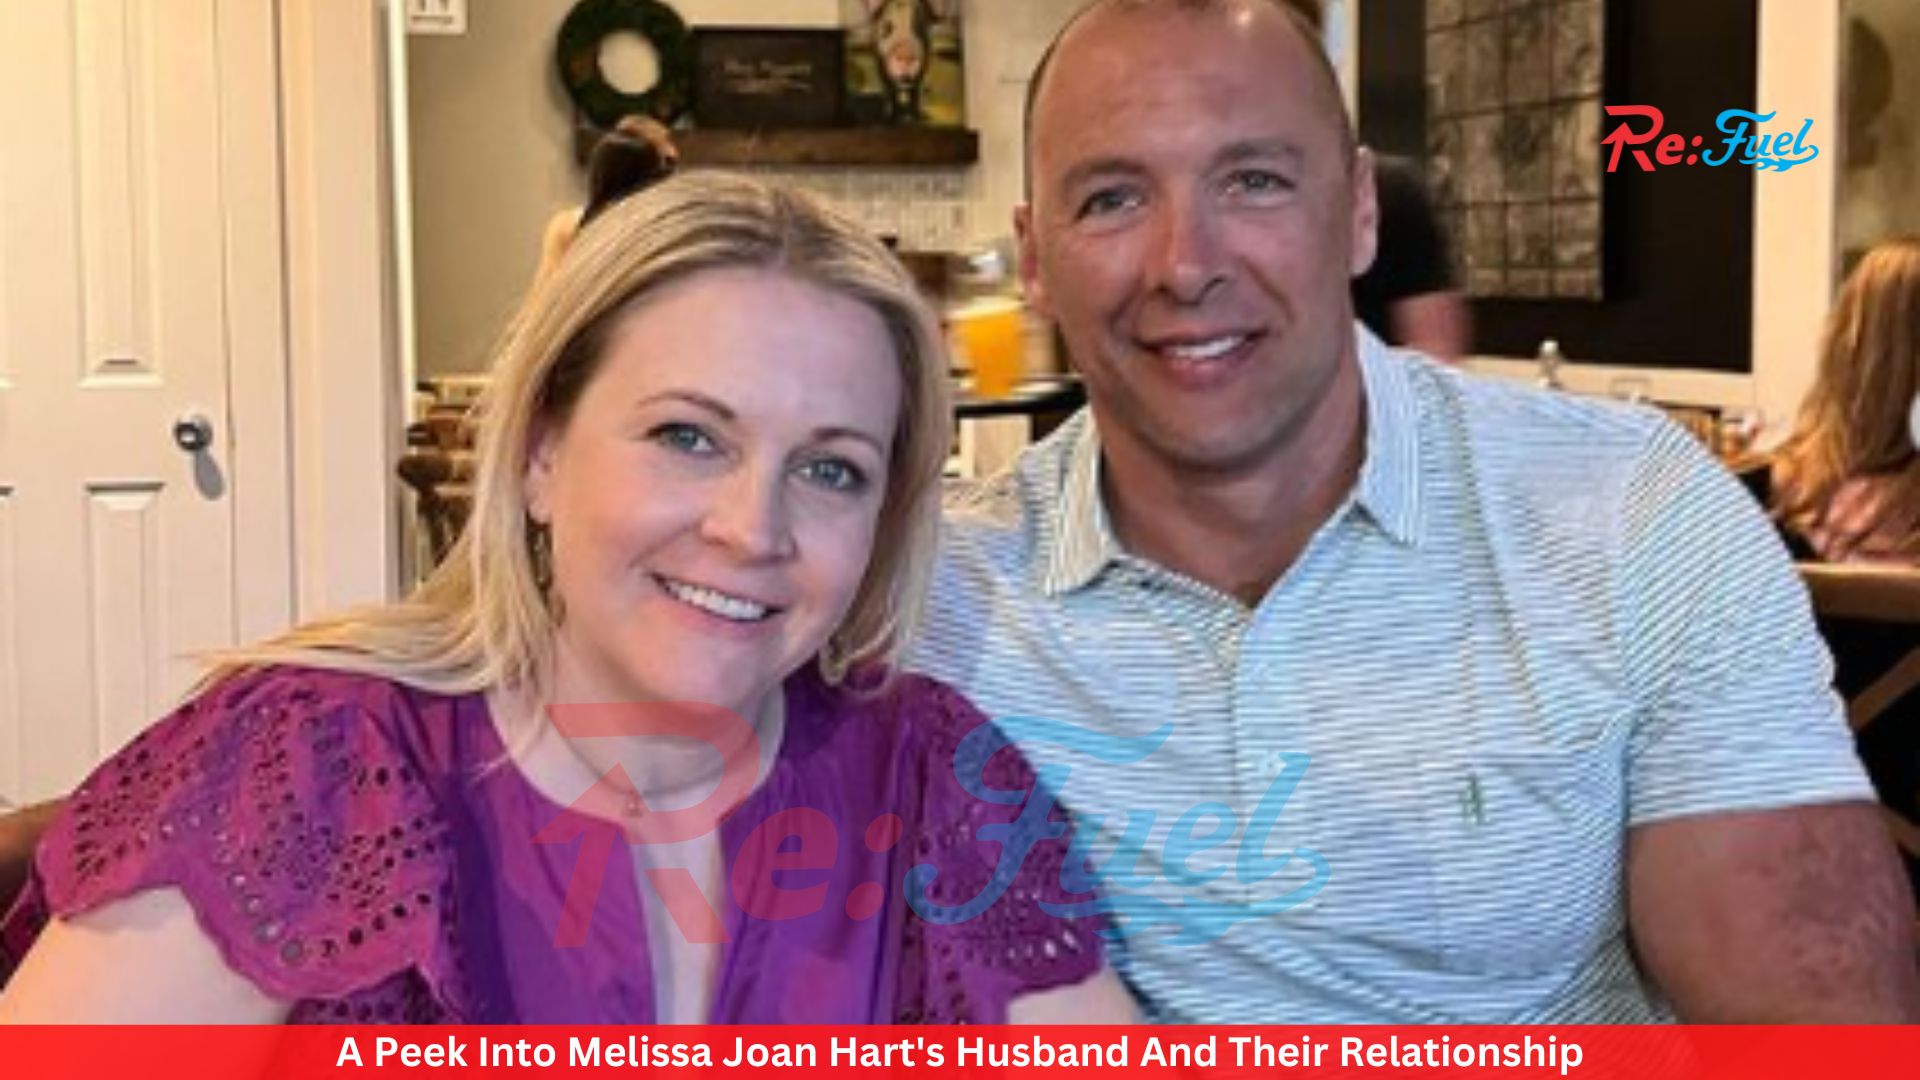 A Peek Into Melissa Joan Hart's Husband And Their Relationship